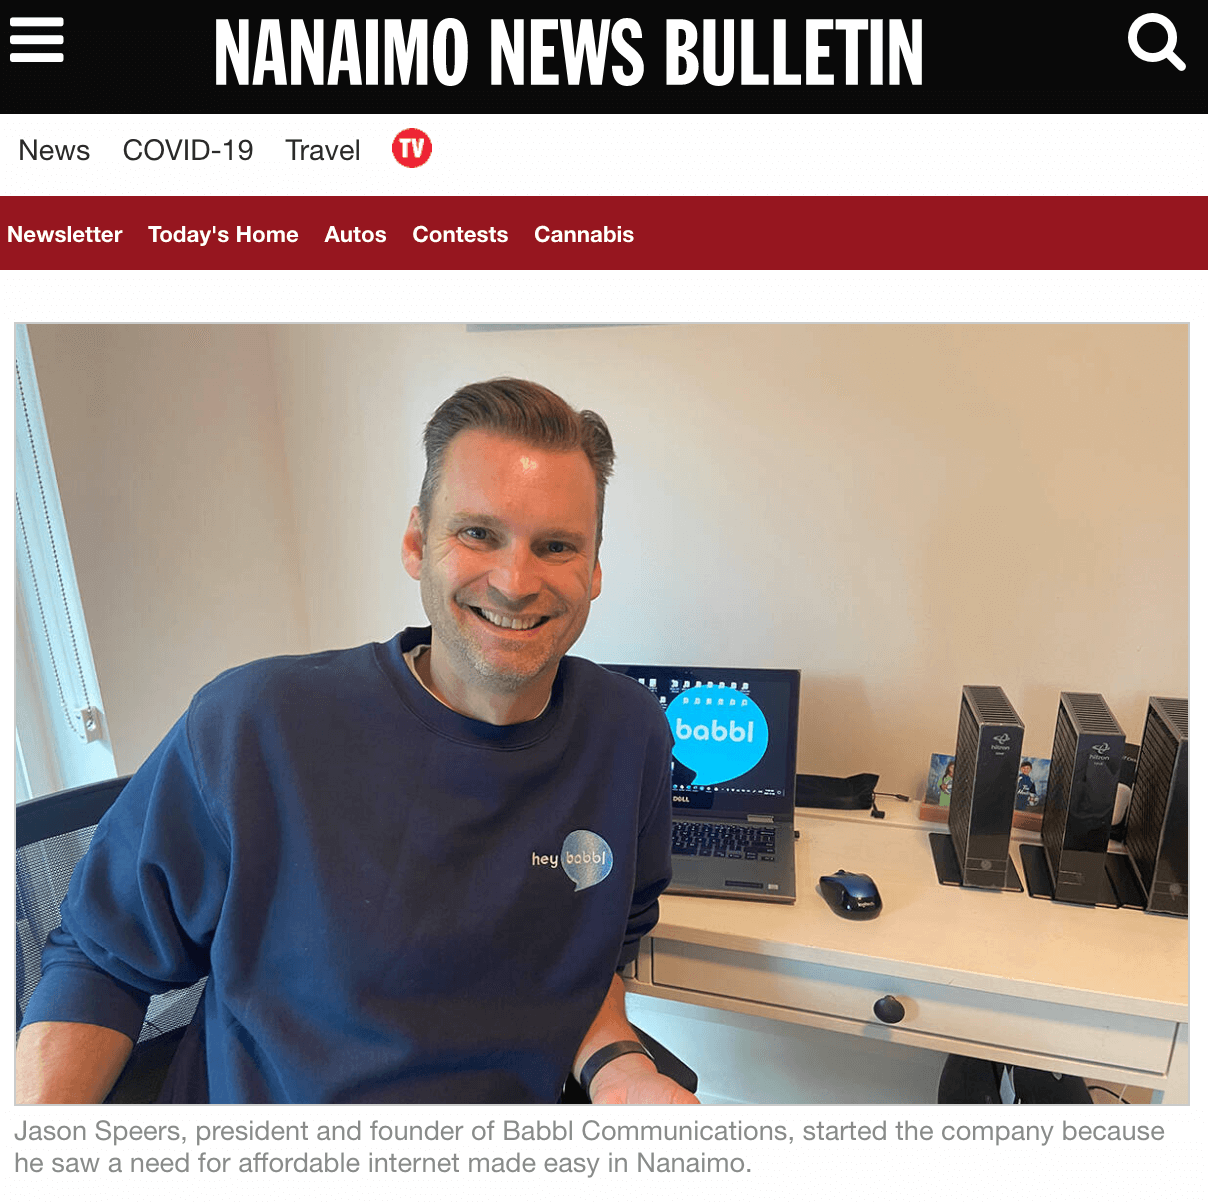 Jason Speers Chats With The Nanaimo News